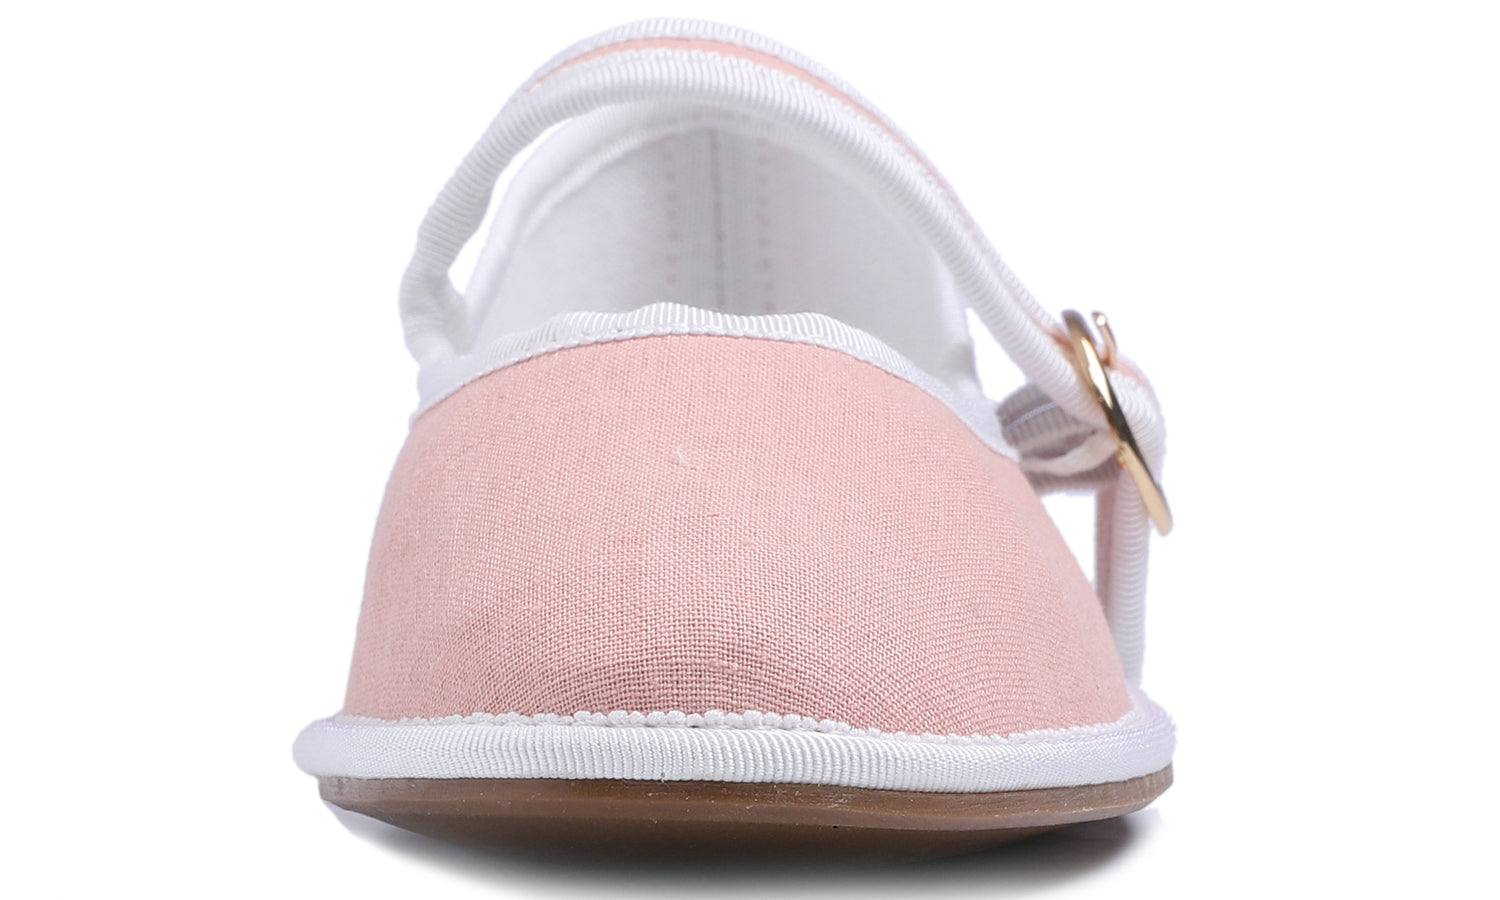 Feversole Women's Soft Breathable Mary Jane Memory Foam Cushioned Comfort Round Toe Metal Buckle Flats Walking Shoes Pink Canvas